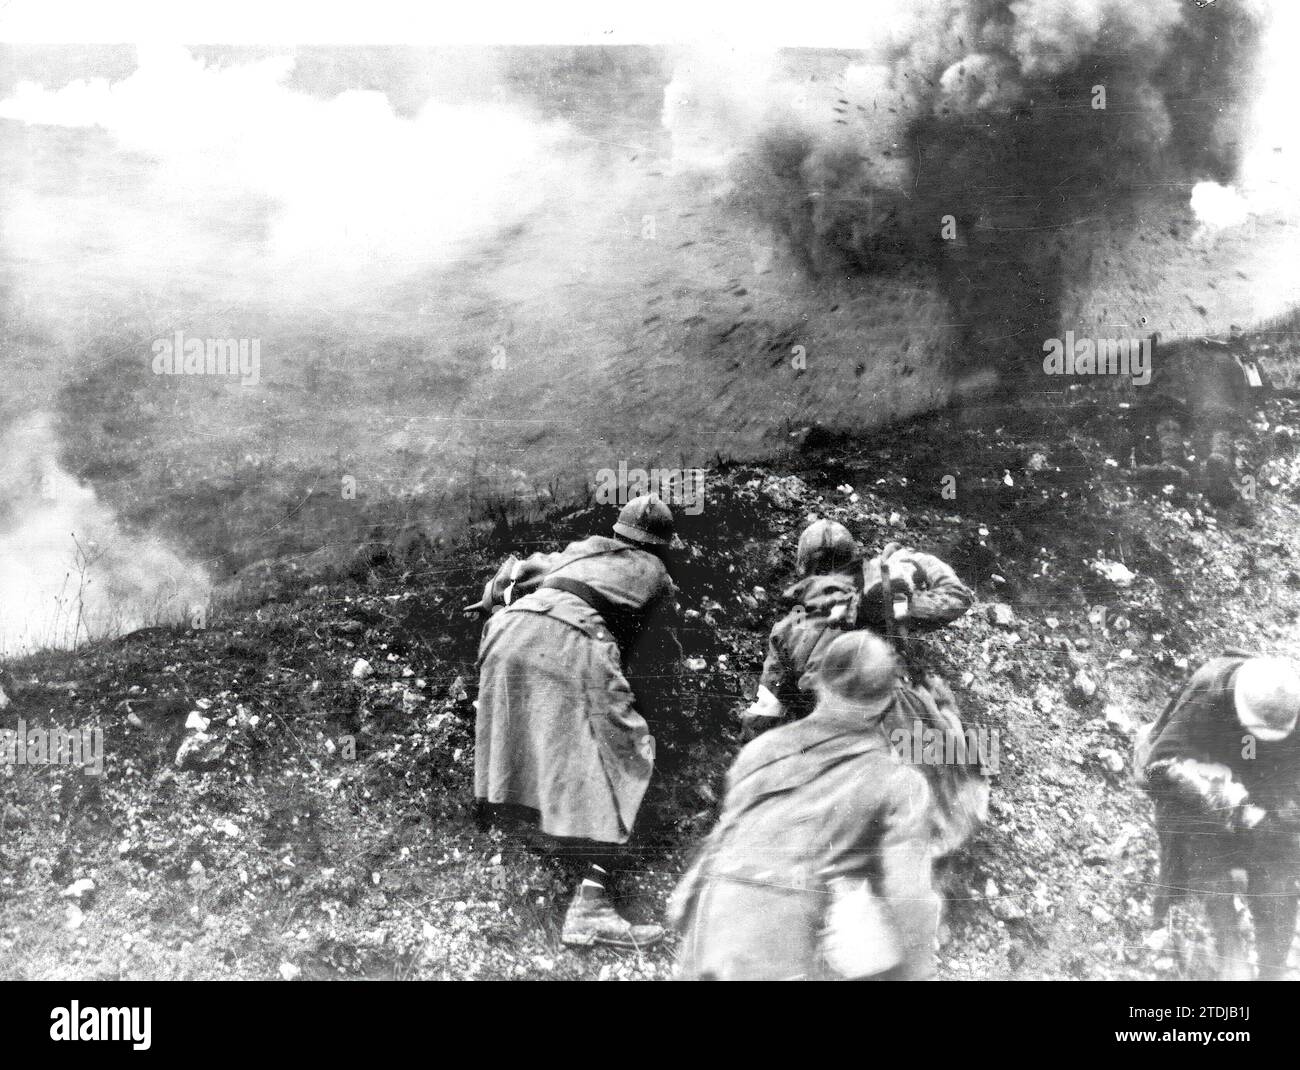 Verdun (France), 1916. A group of soldiers watch a projectile explode on the fields of Verdun (France), where one of the bloodiest battles was fought for almost a year. Credit: Album / Archivo ABC Stock Photo